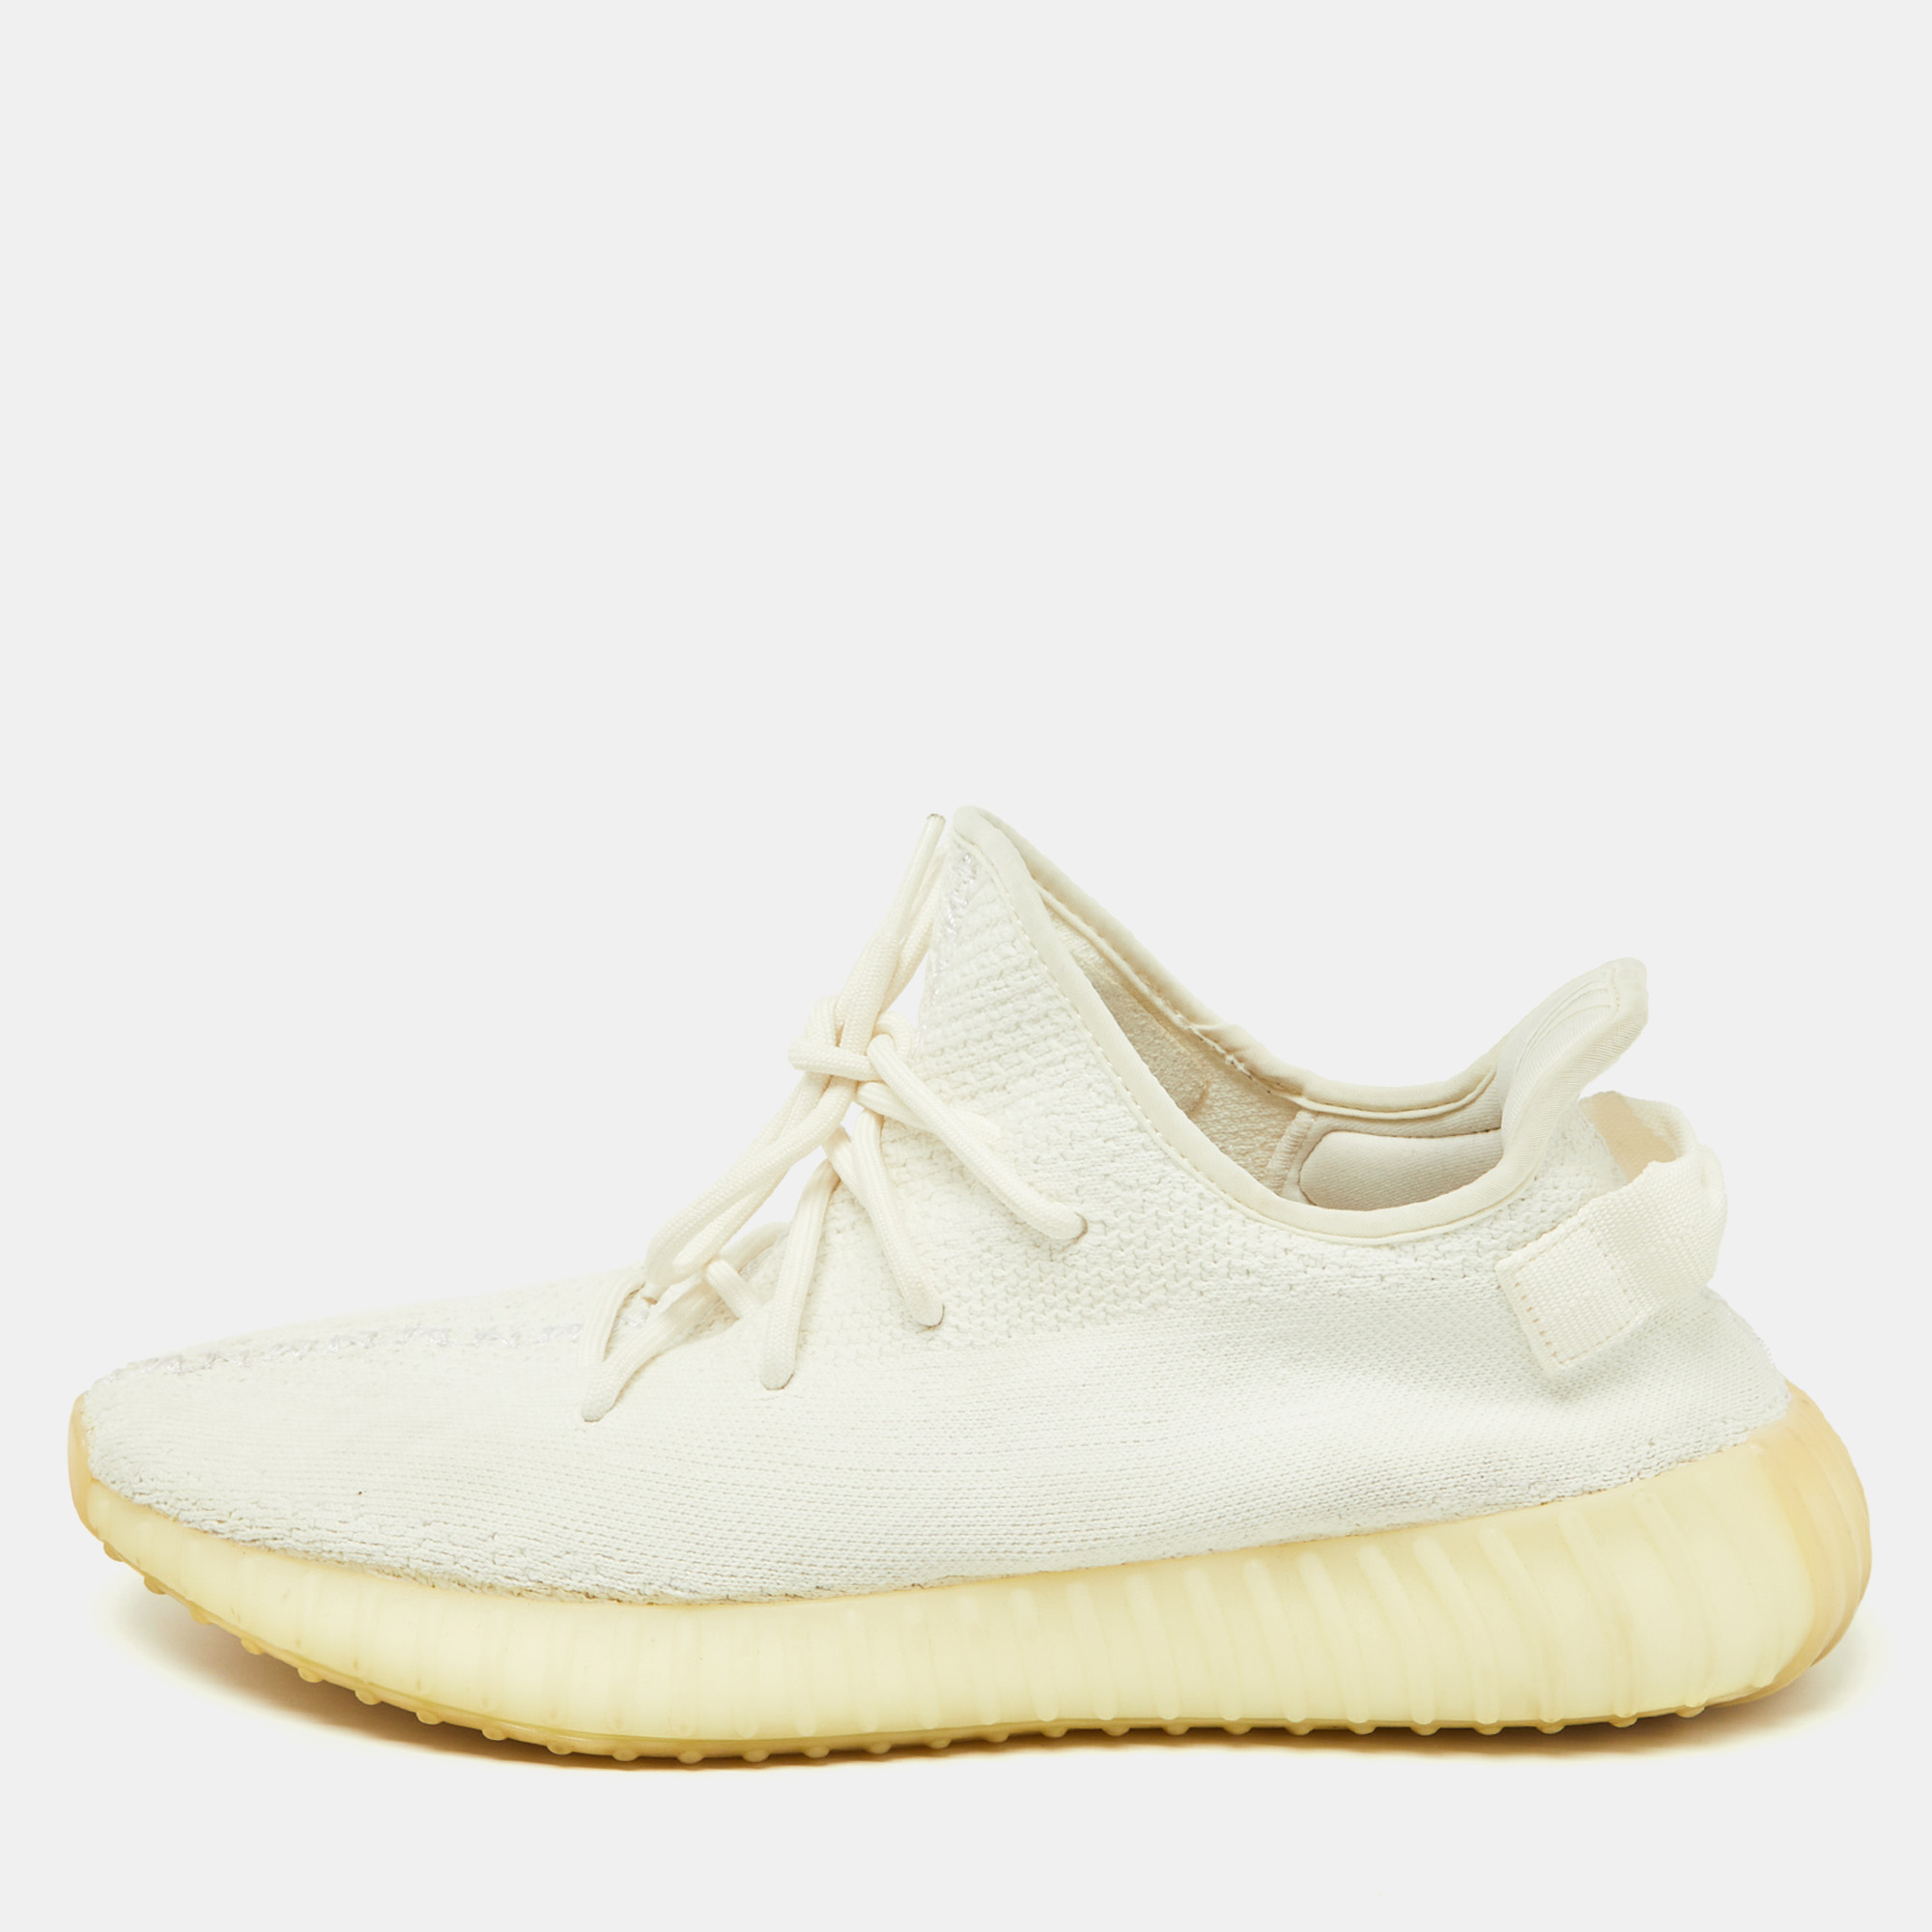 

Yeezy x Adidas White Knit Fabric Boost 350 V2 Cream Sneakers Size 48